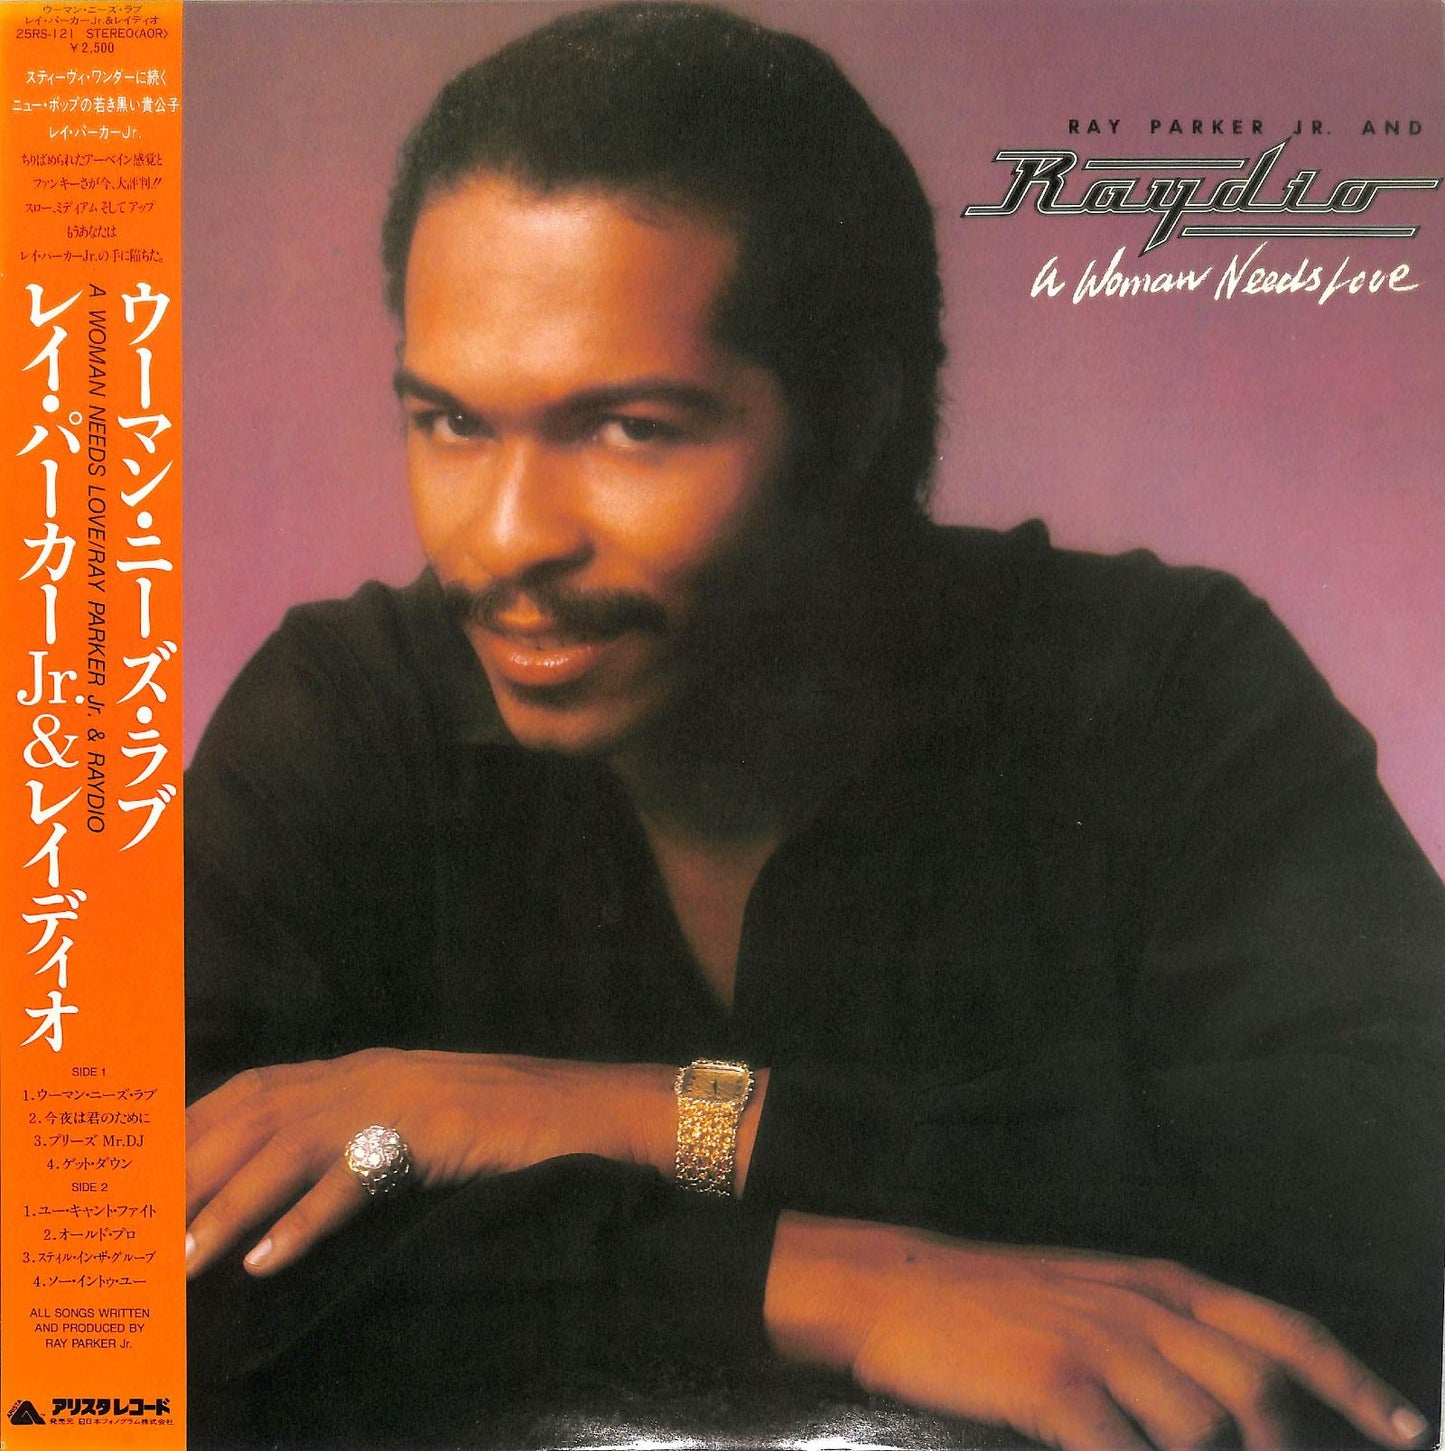 RAY PARKER JR. AND RAYDIO - A Woman Needs Love